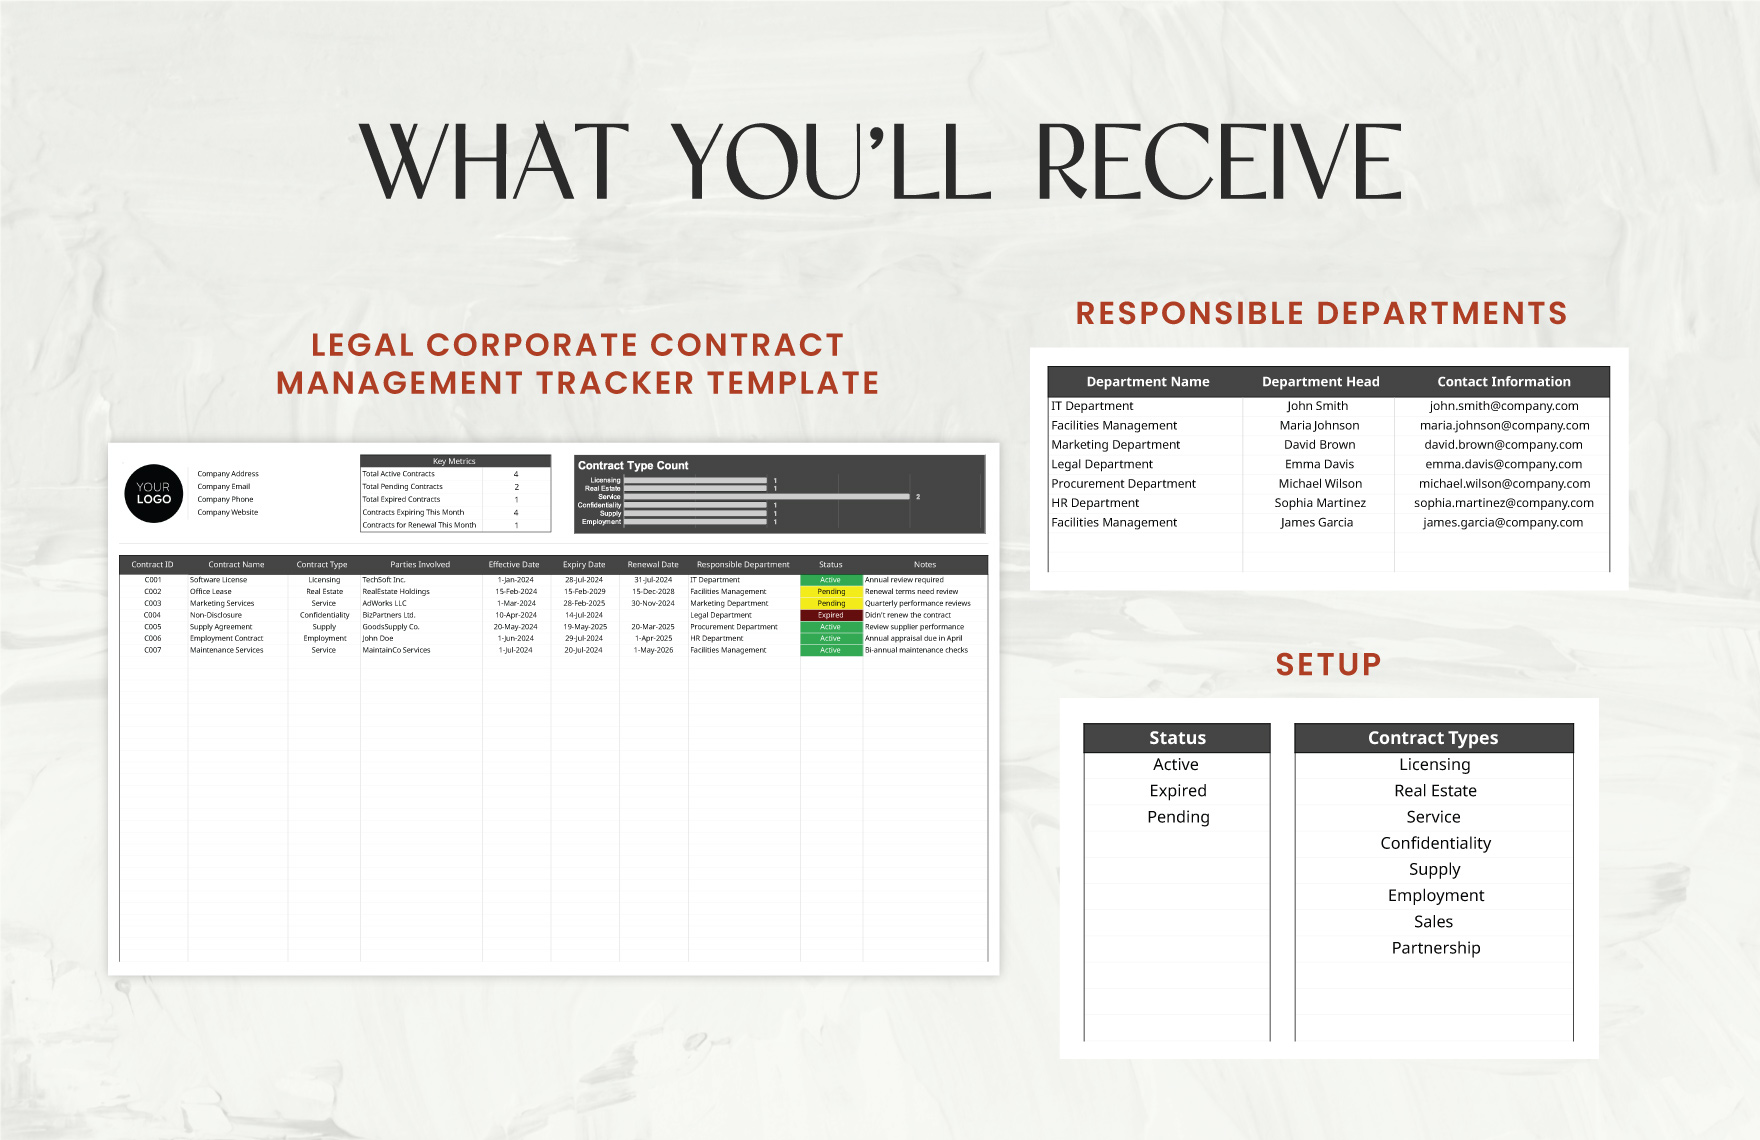 Legal Corporate Contract Management Tracker Template